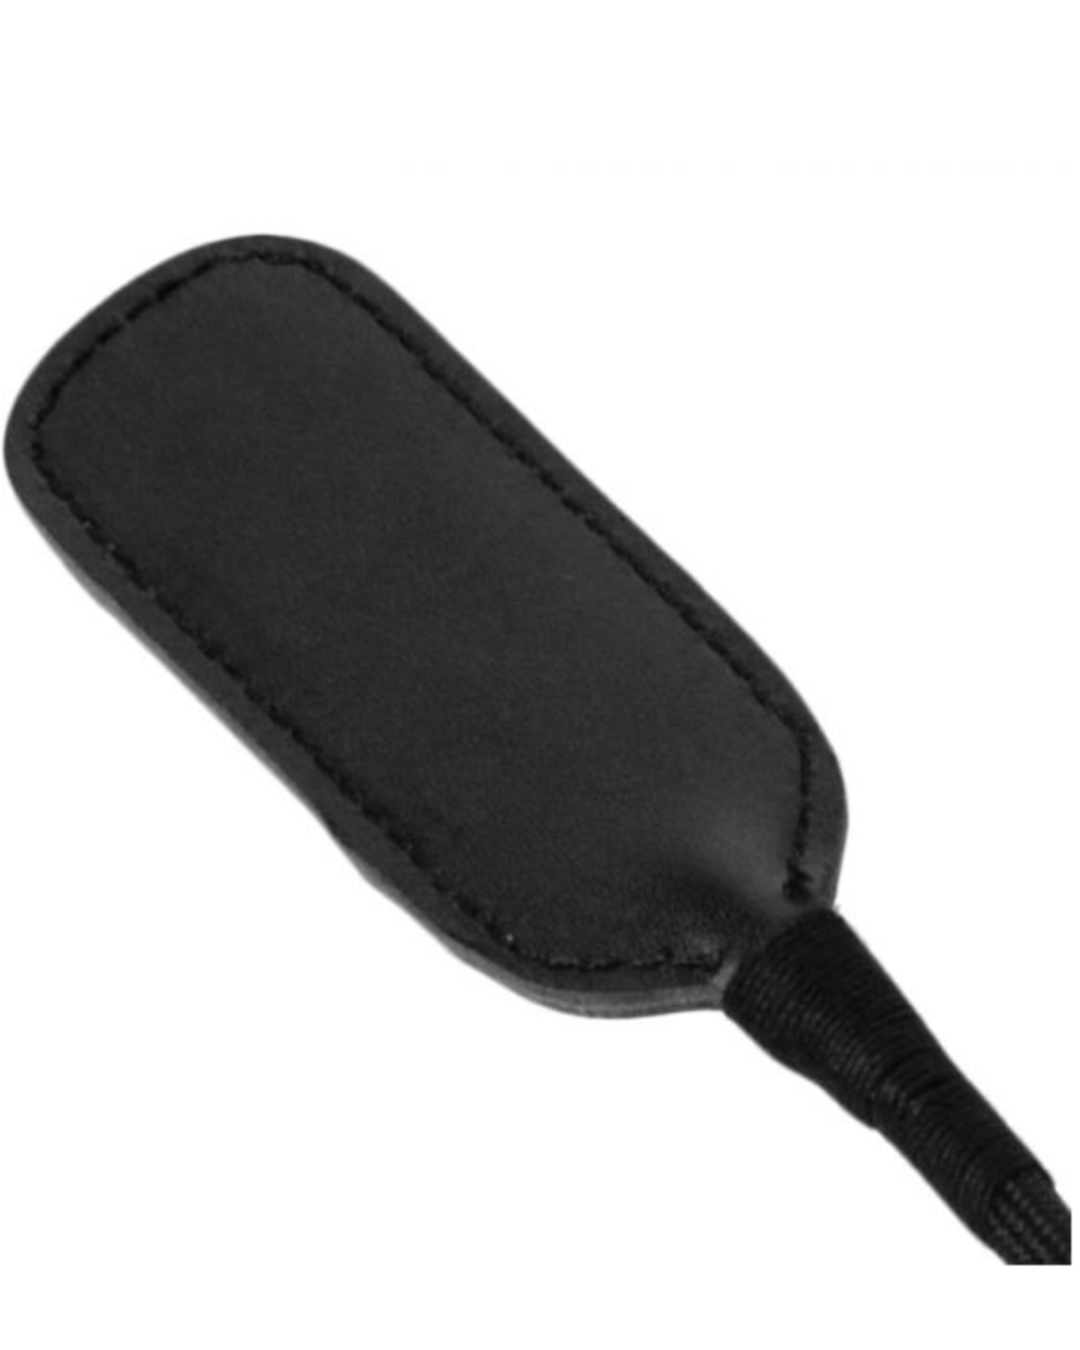 Strict Leather Short Riding Crop  close up paddle